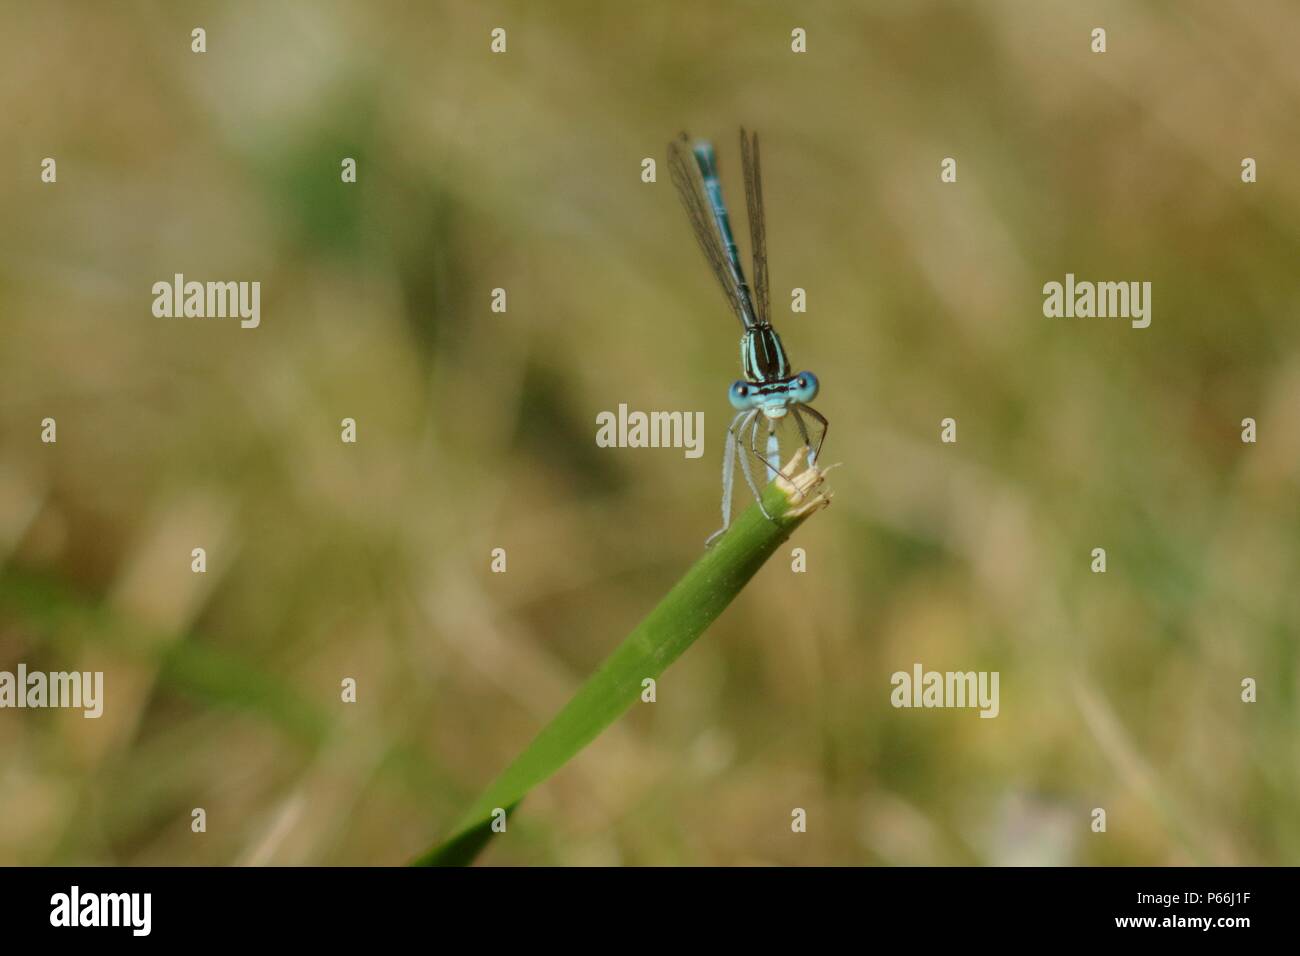 Blue dragonfly on the grass Stock Photo